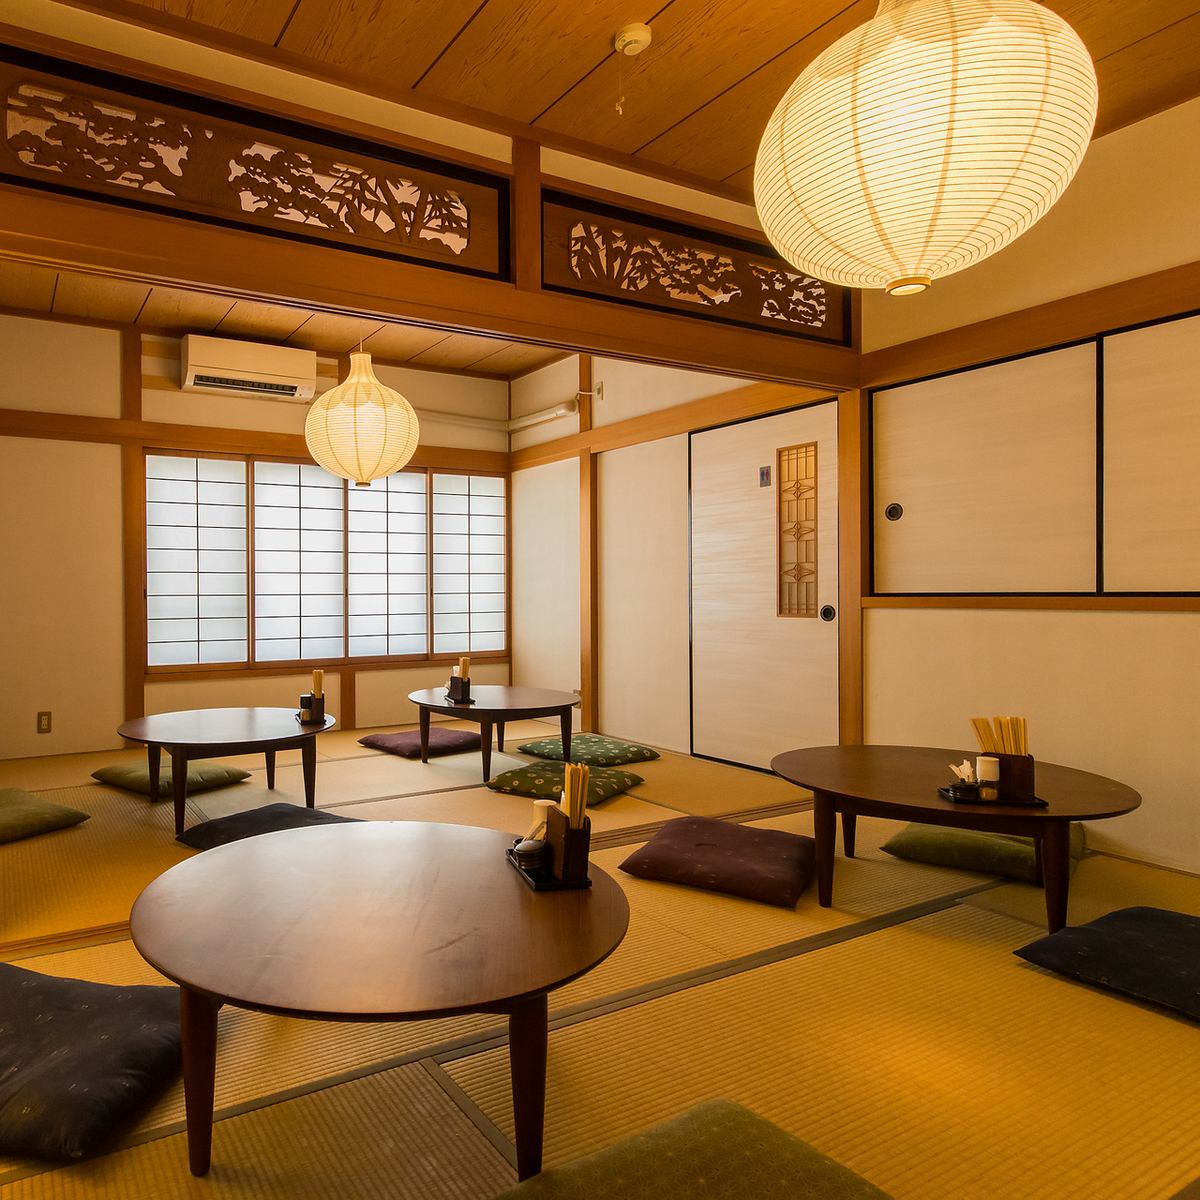 The soft light of the lanterns floating in the Japanese-style room creates an extraordinary atmosphere.